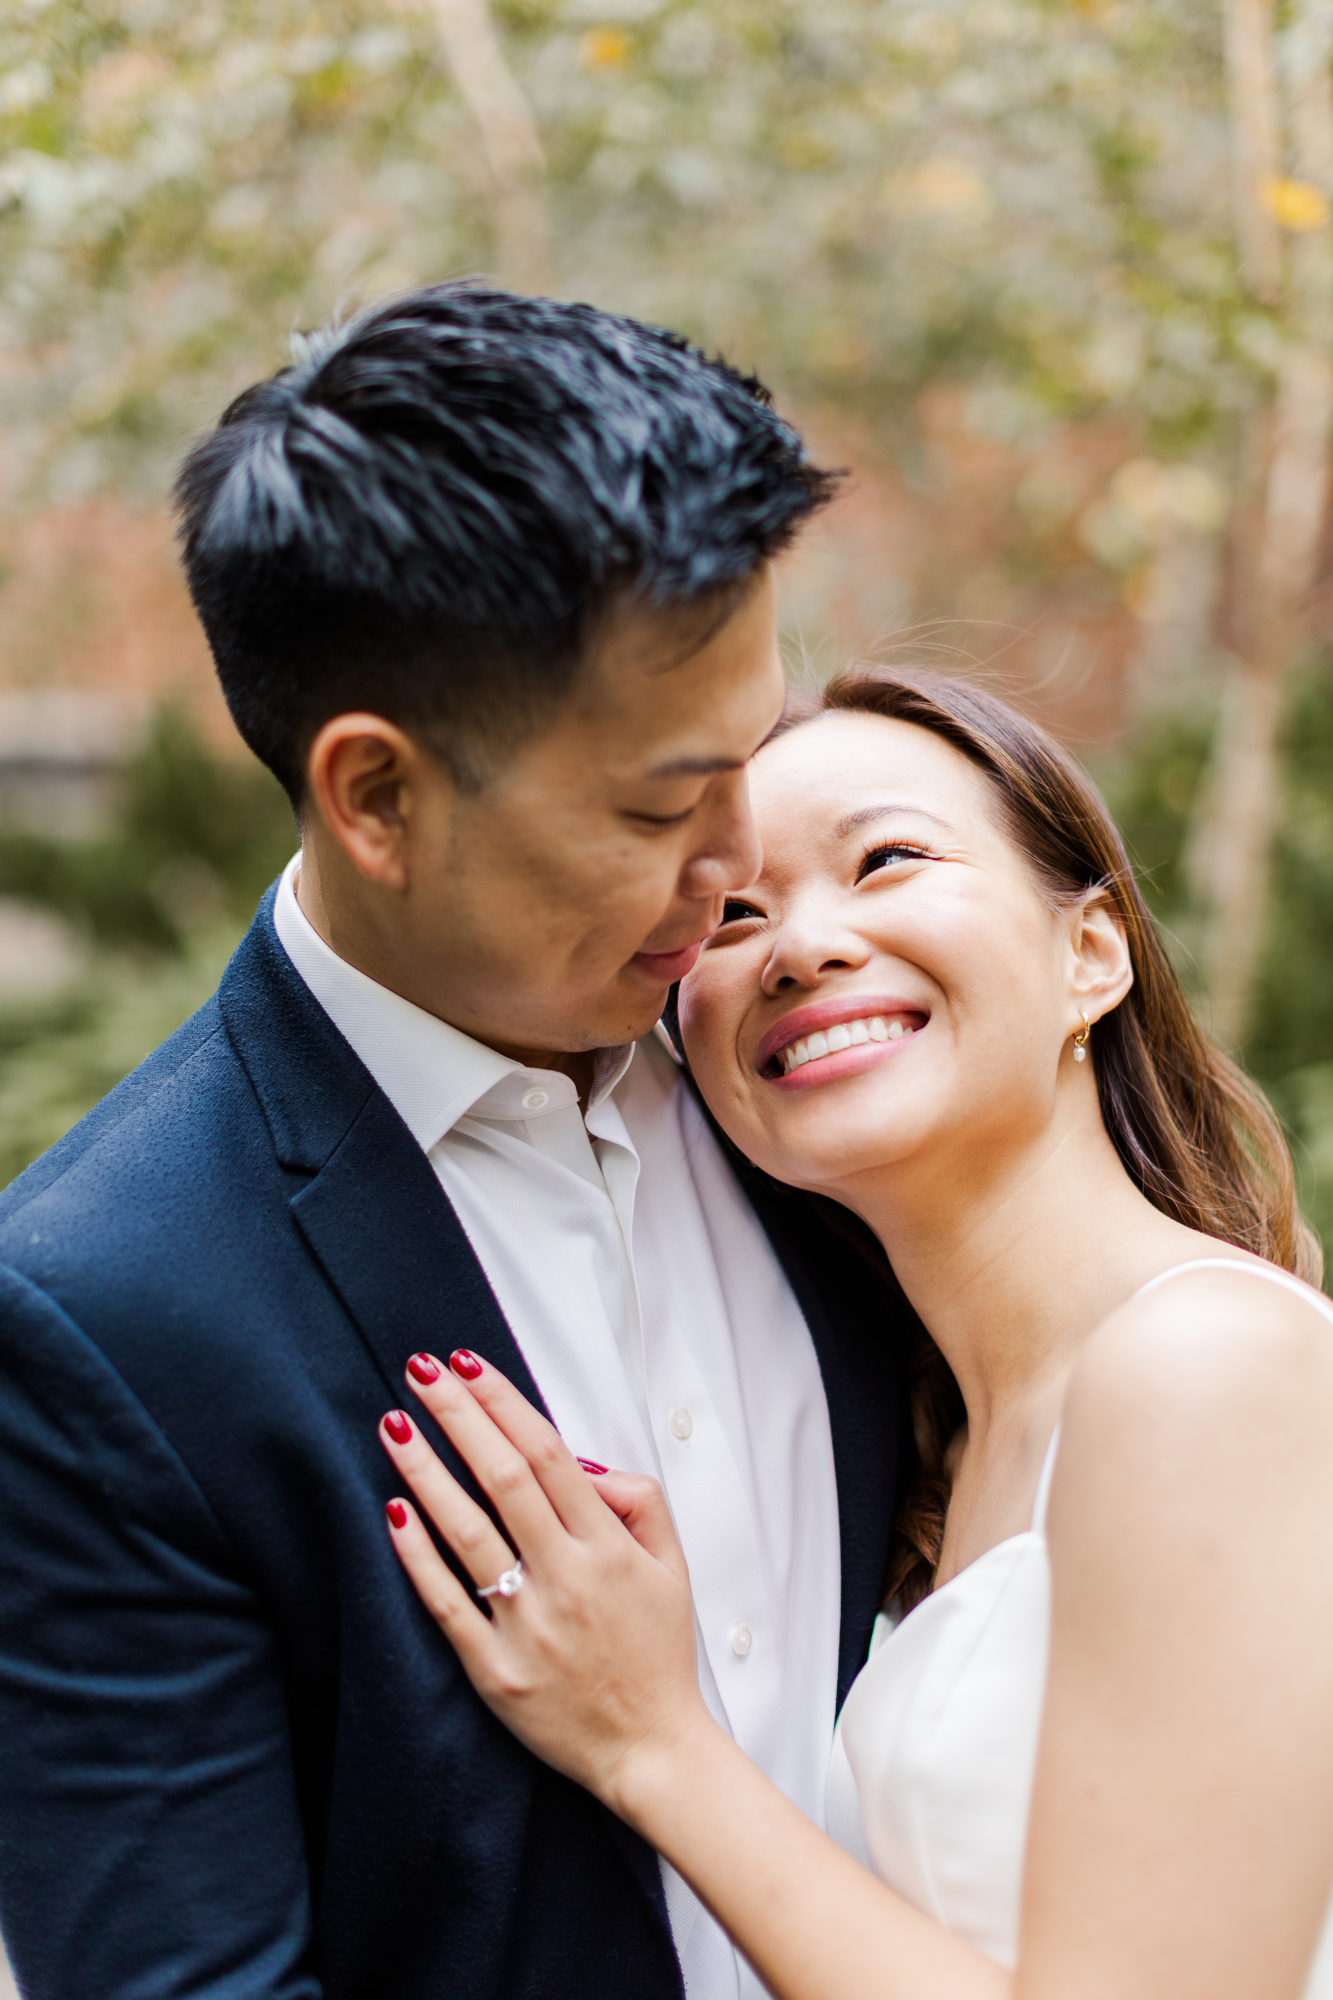 The Best Time of Year for Iconic DUMBO Engagement Photos